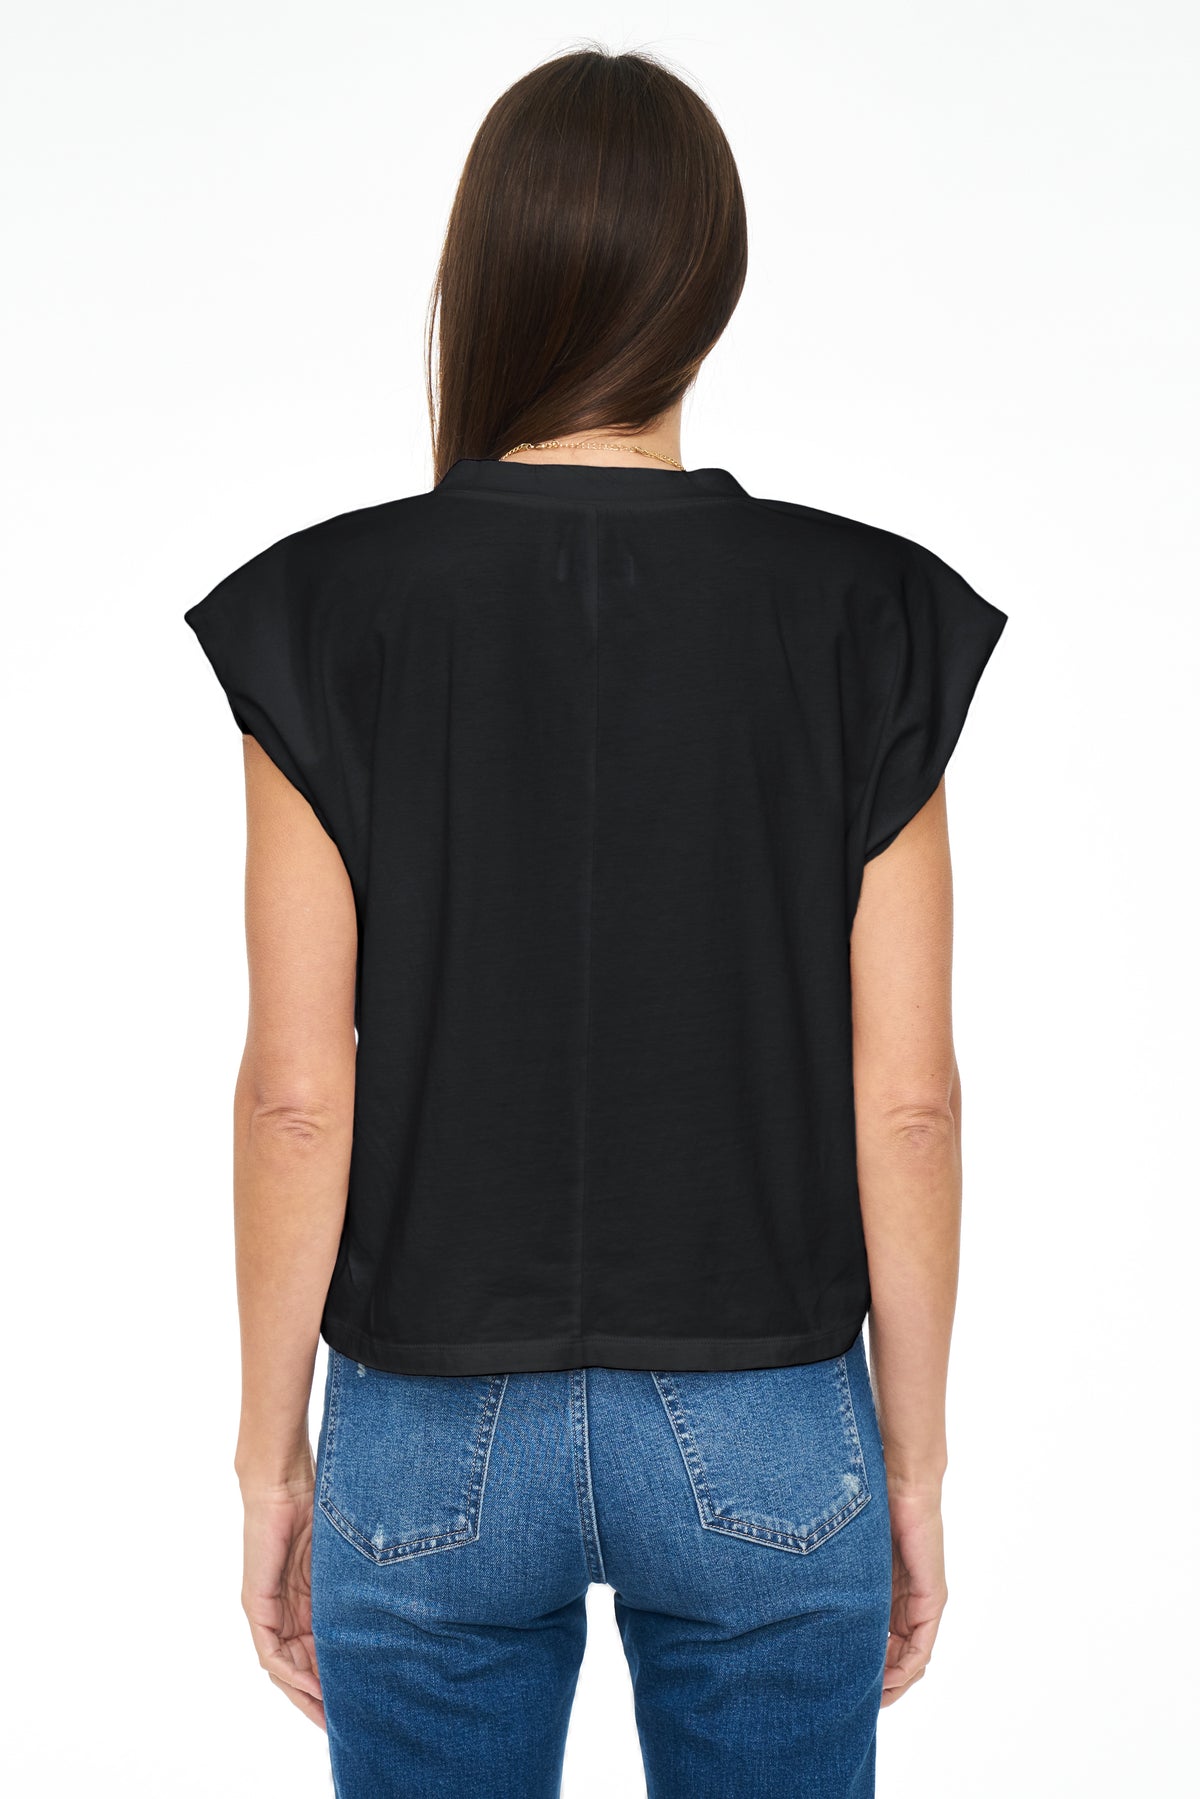 Carson V-Neck Muscle Tee - Black